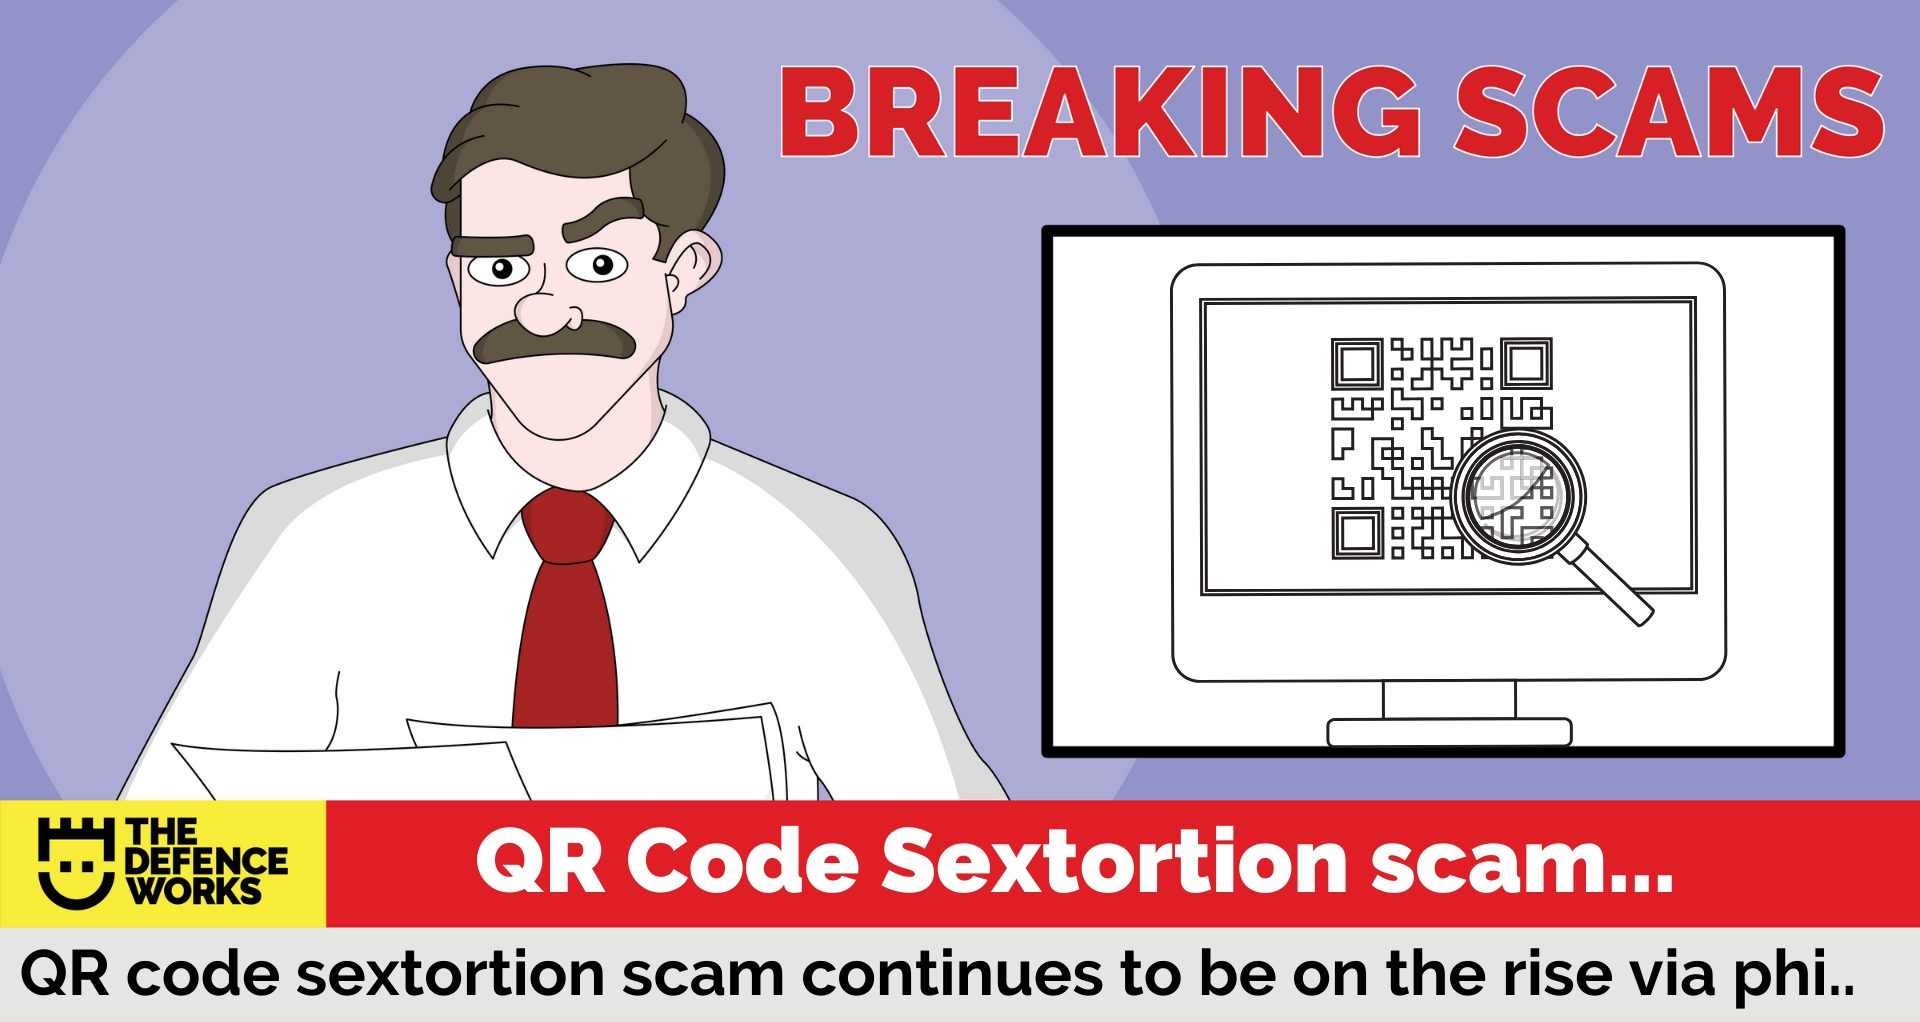 Scanners Watching Your Every Move: The QR Code Sextortion Scam